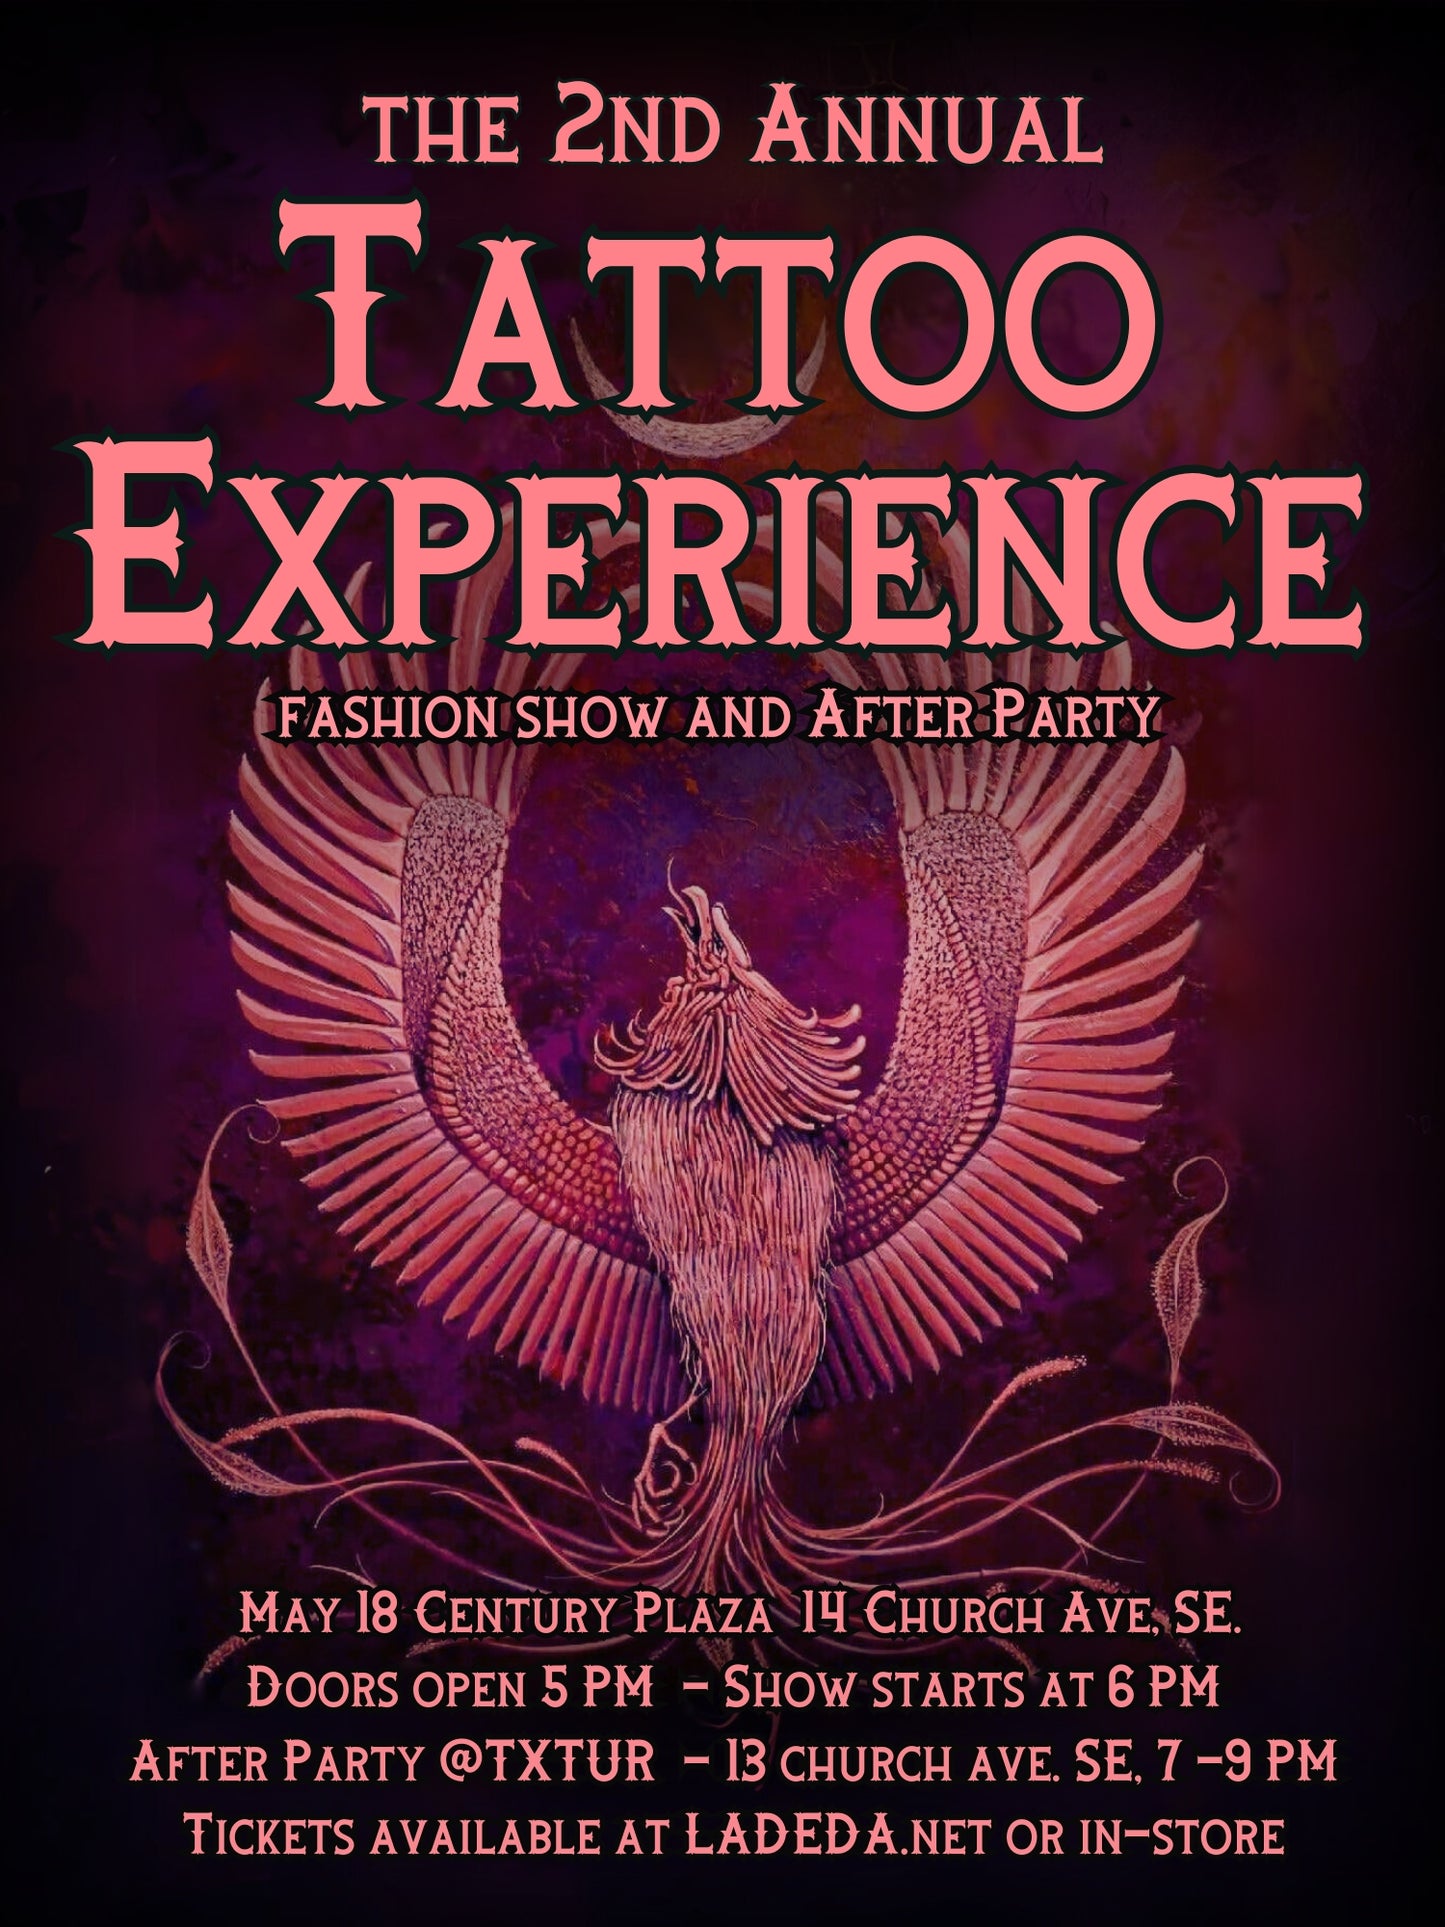 The 2nd Annual Tattoo Experience